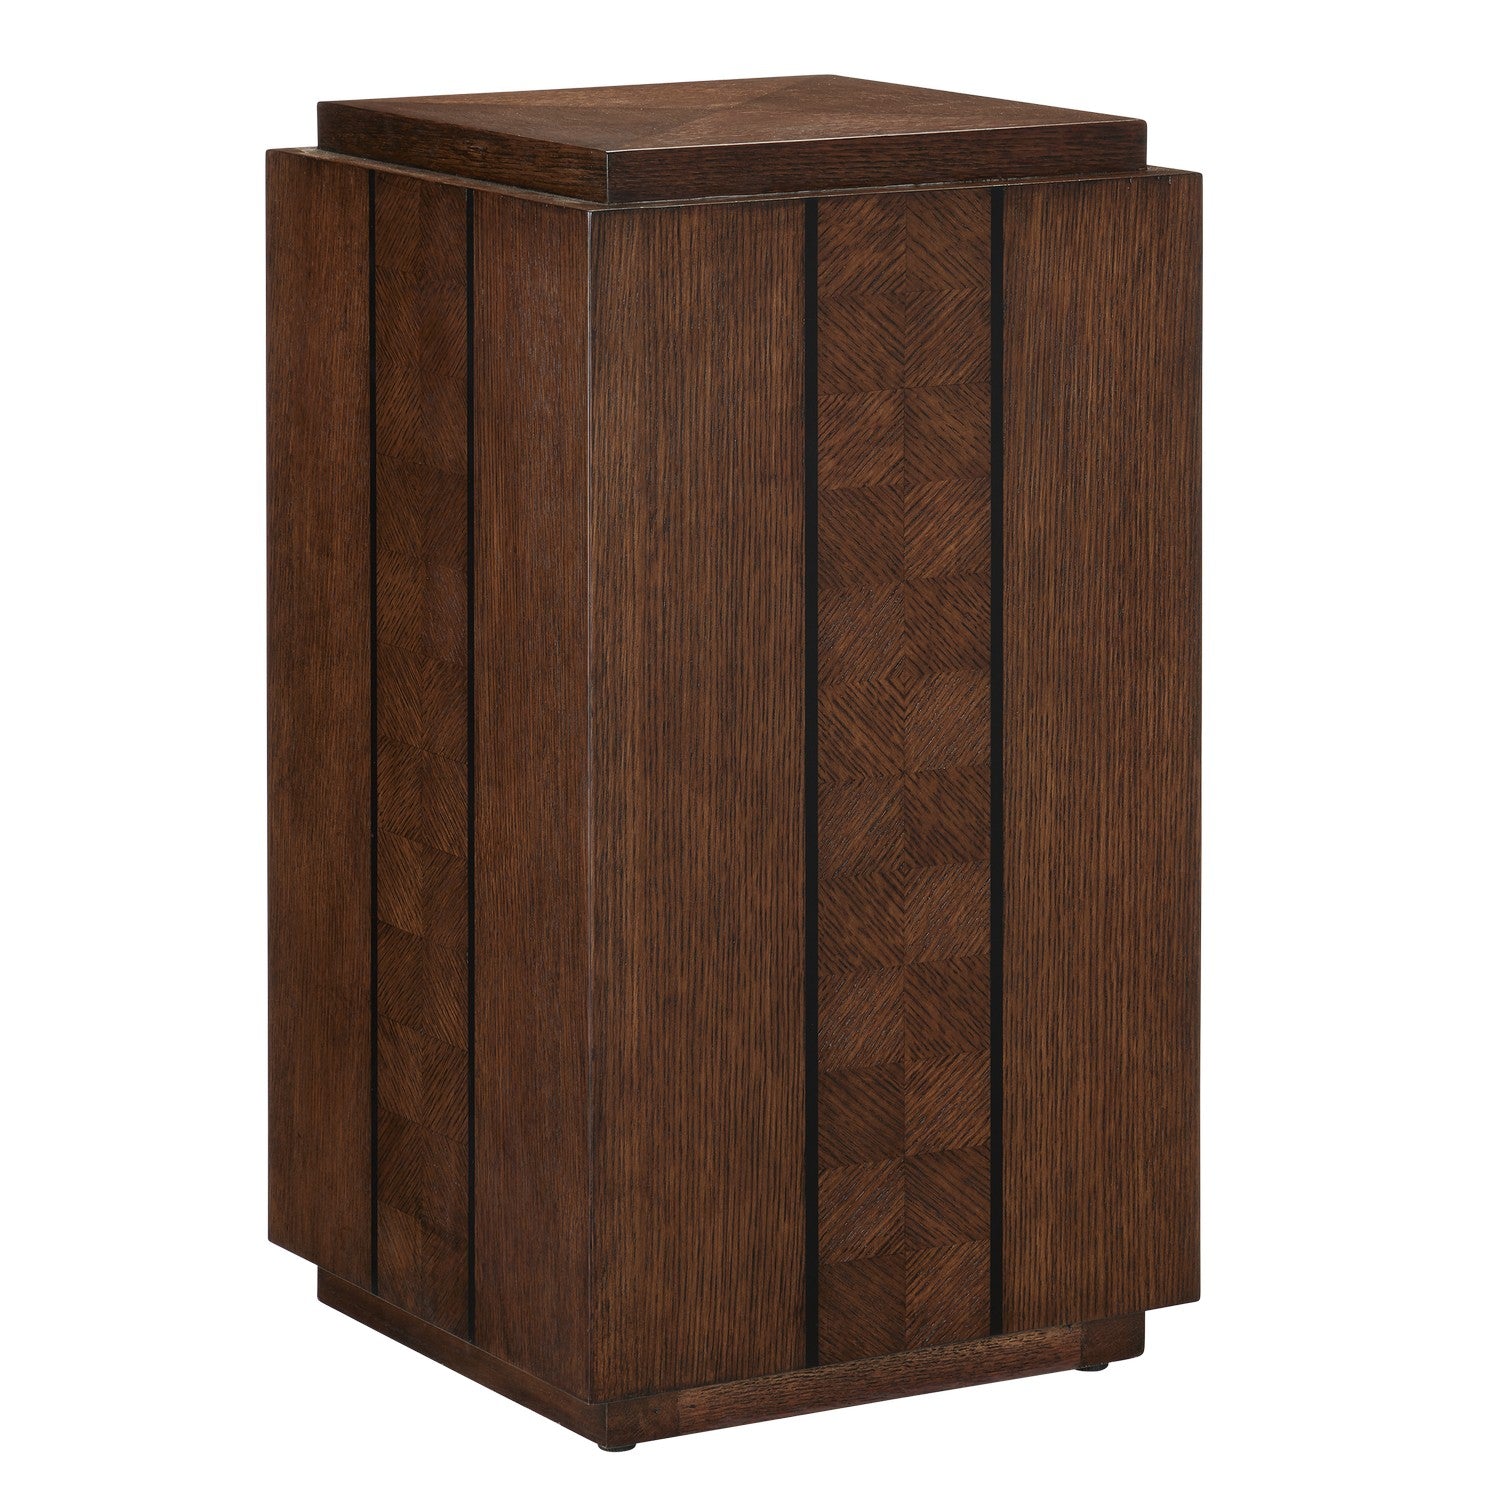 Currey and Company - 3000-0252 - Accent Table - Kona/Black